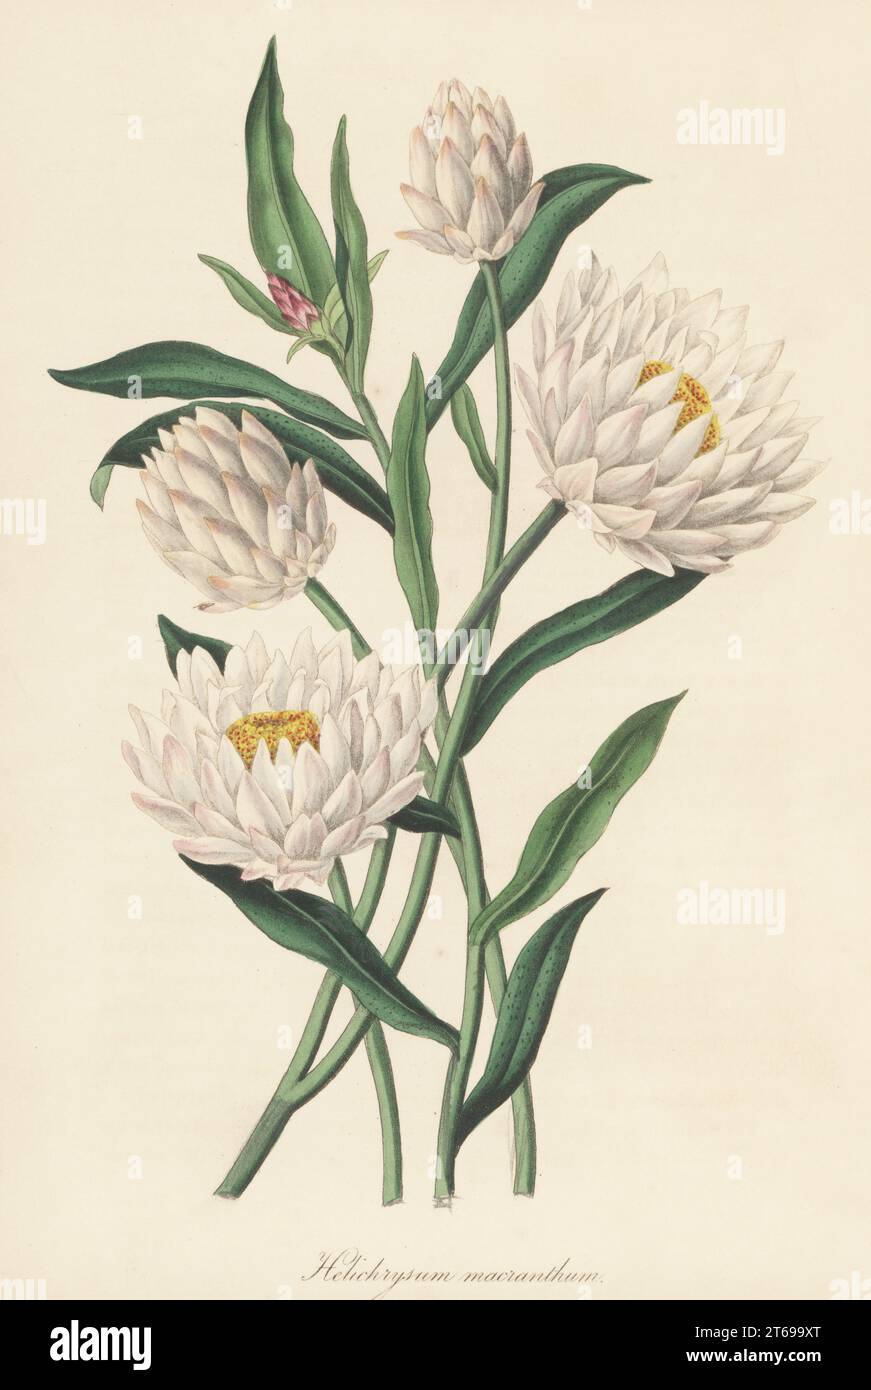 Strawflower, Xerochrysum macranthum. Native to the Swan River colony, Australia, introduced to England by Captain James Mangles, R.N. Large-flowered helichrysum, Helichrysum macranthum. Handcoloured lithograph from Joseph Paxtons Magazine of Botany, and Register of Flowering Plants, Volume 5, Orr and Smith, London, 1838. Stock Photo